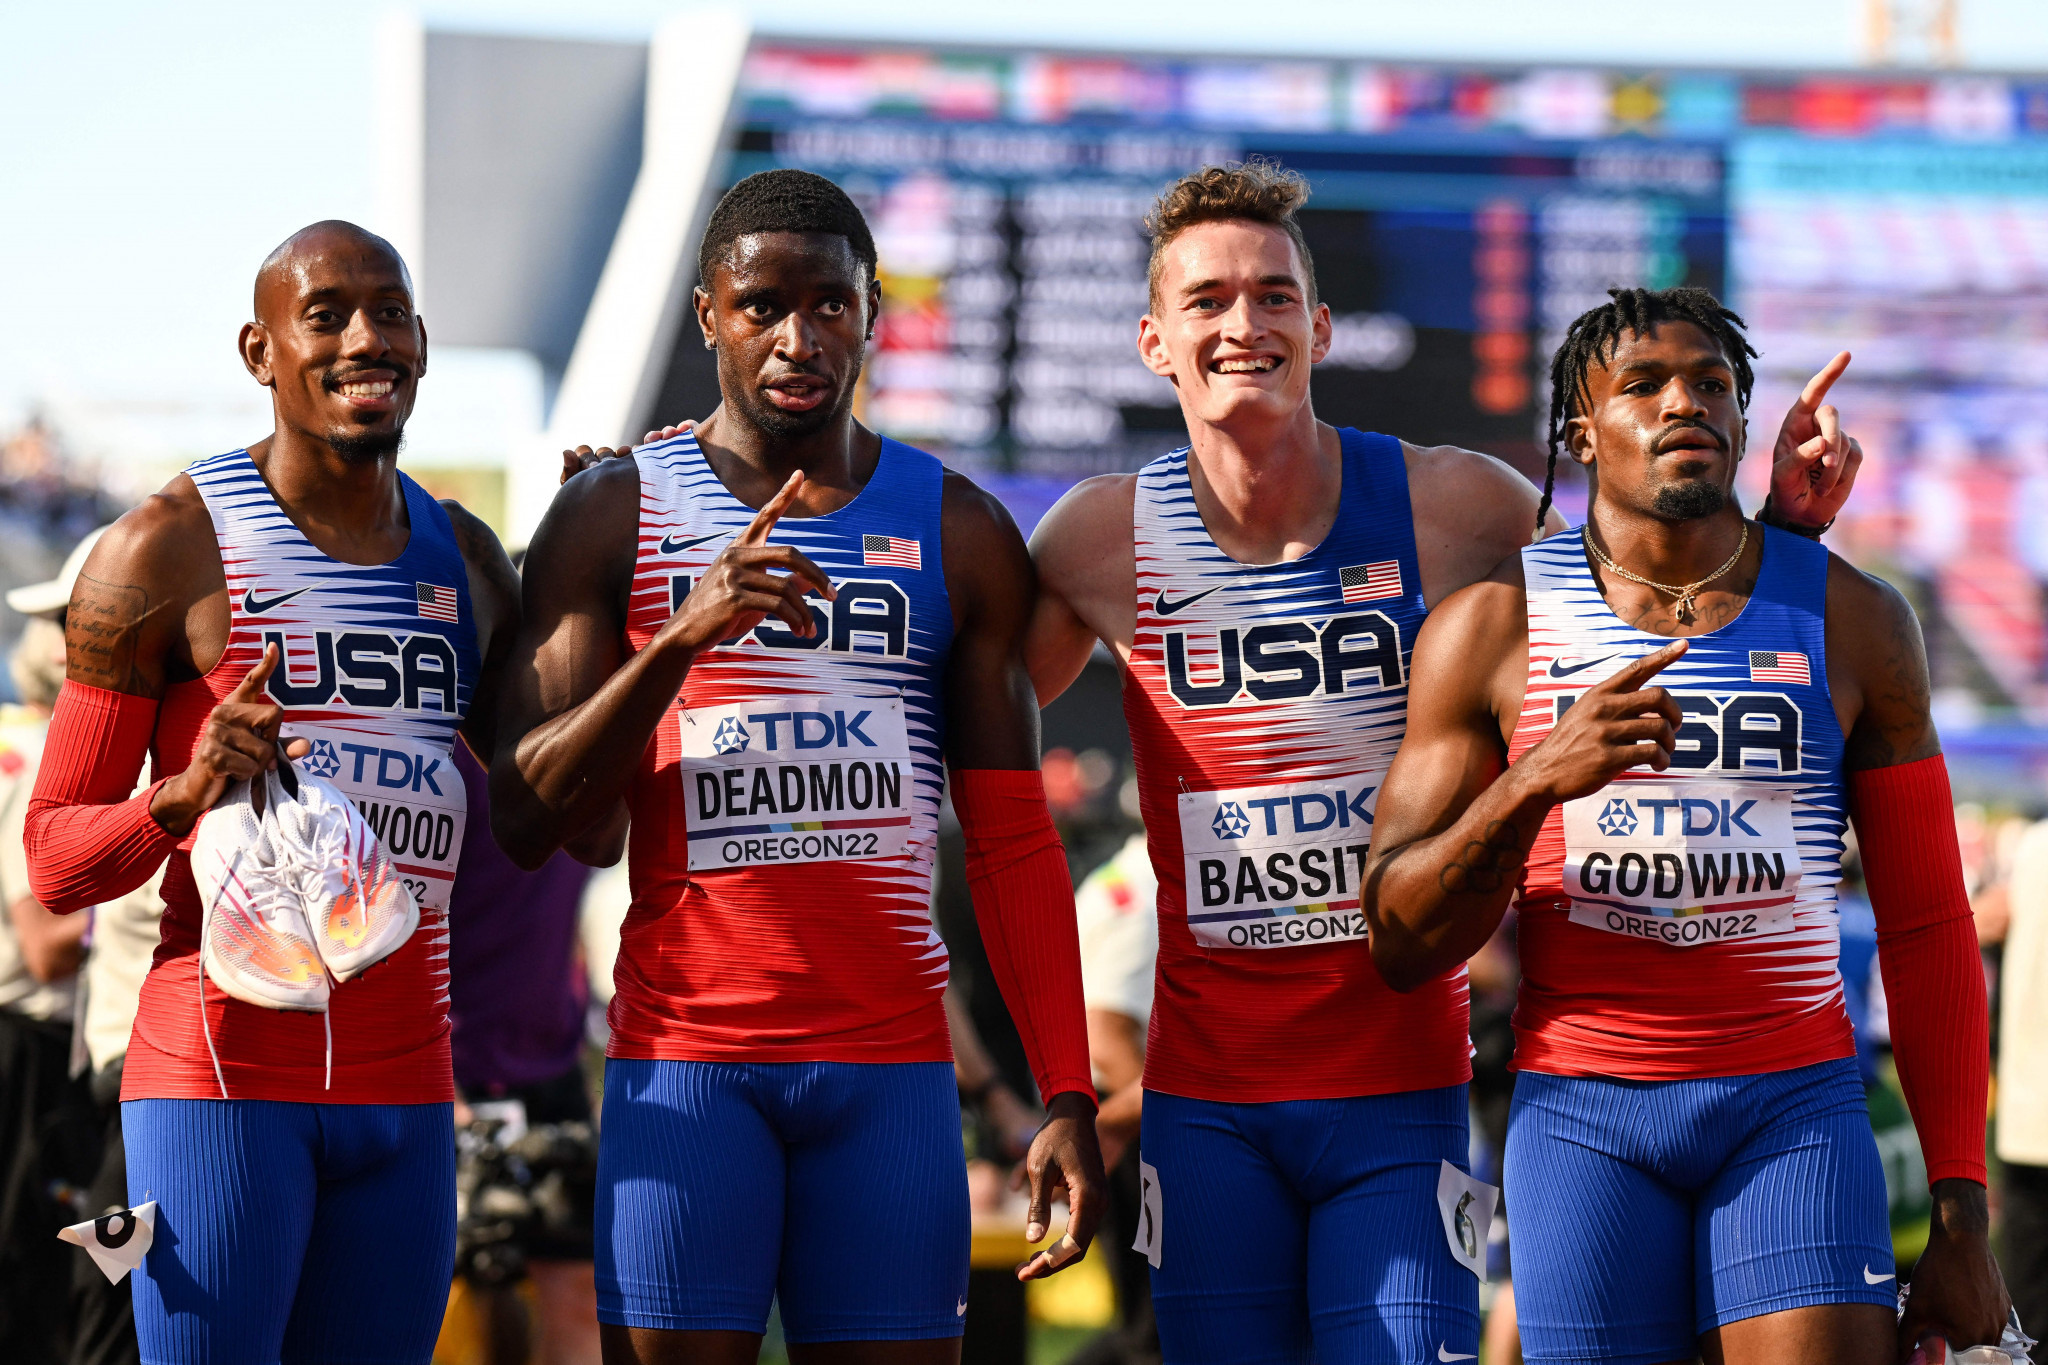 The men's 4x400m relay finals also belonged to the hosts who came home in 2:56.17 ©Getty Images